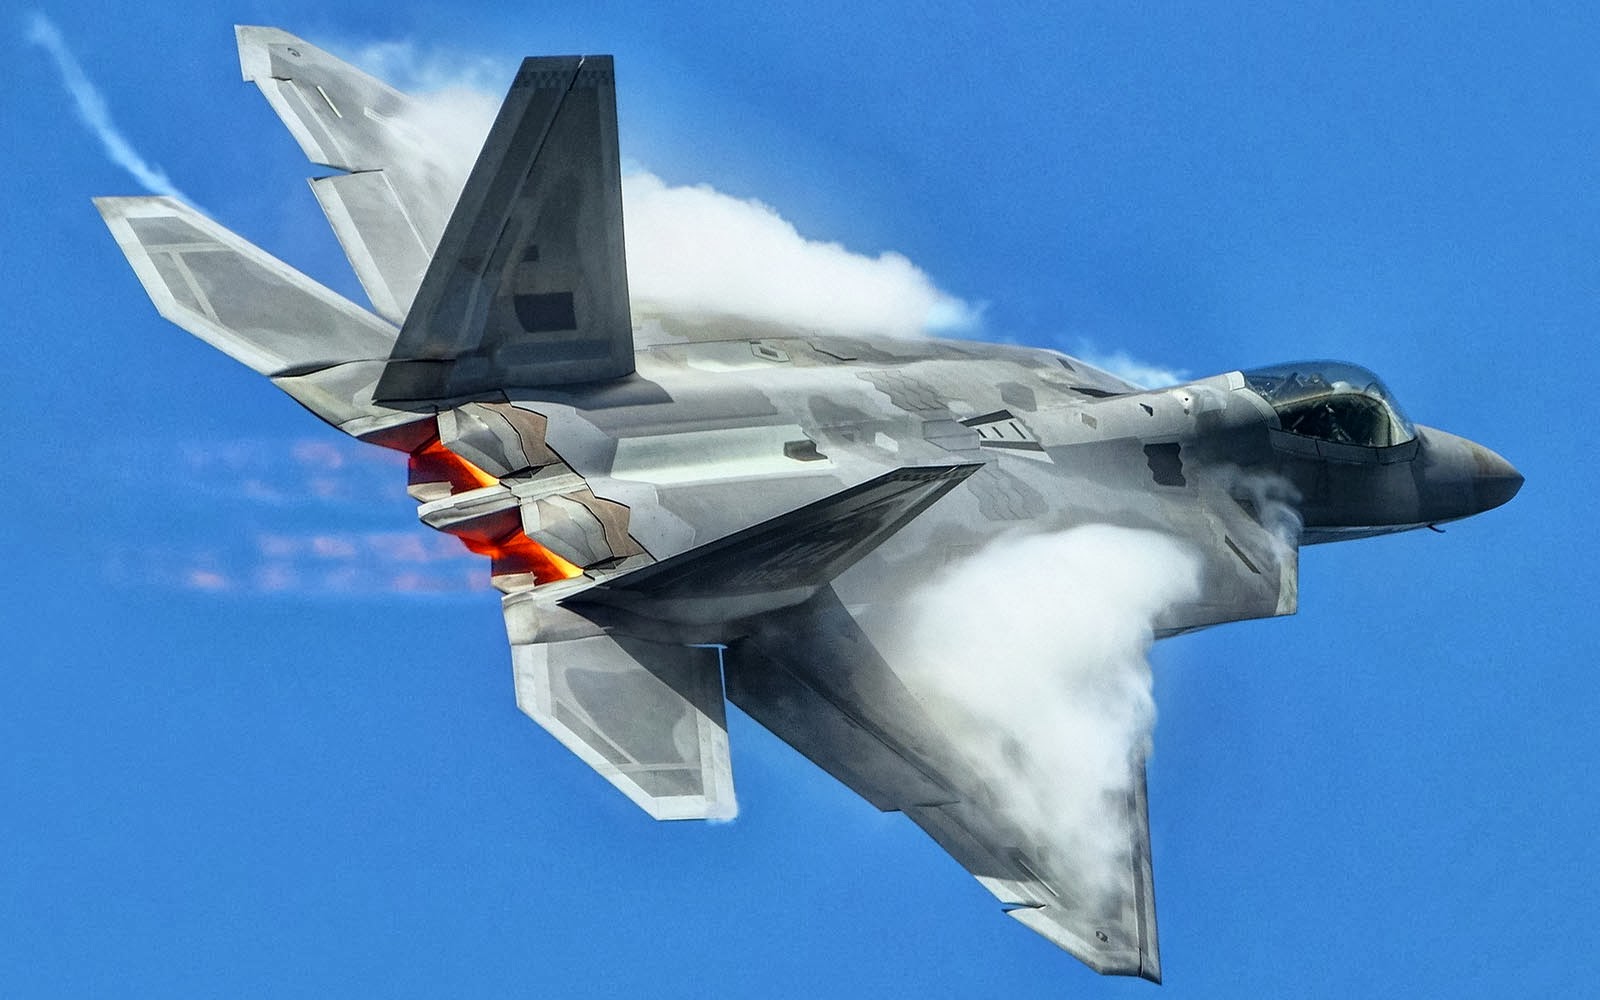 f 22 raptor wallpaper,aircraft,airplane,military aircraft,lockheed martin f 22 raptor,fighter aircraft